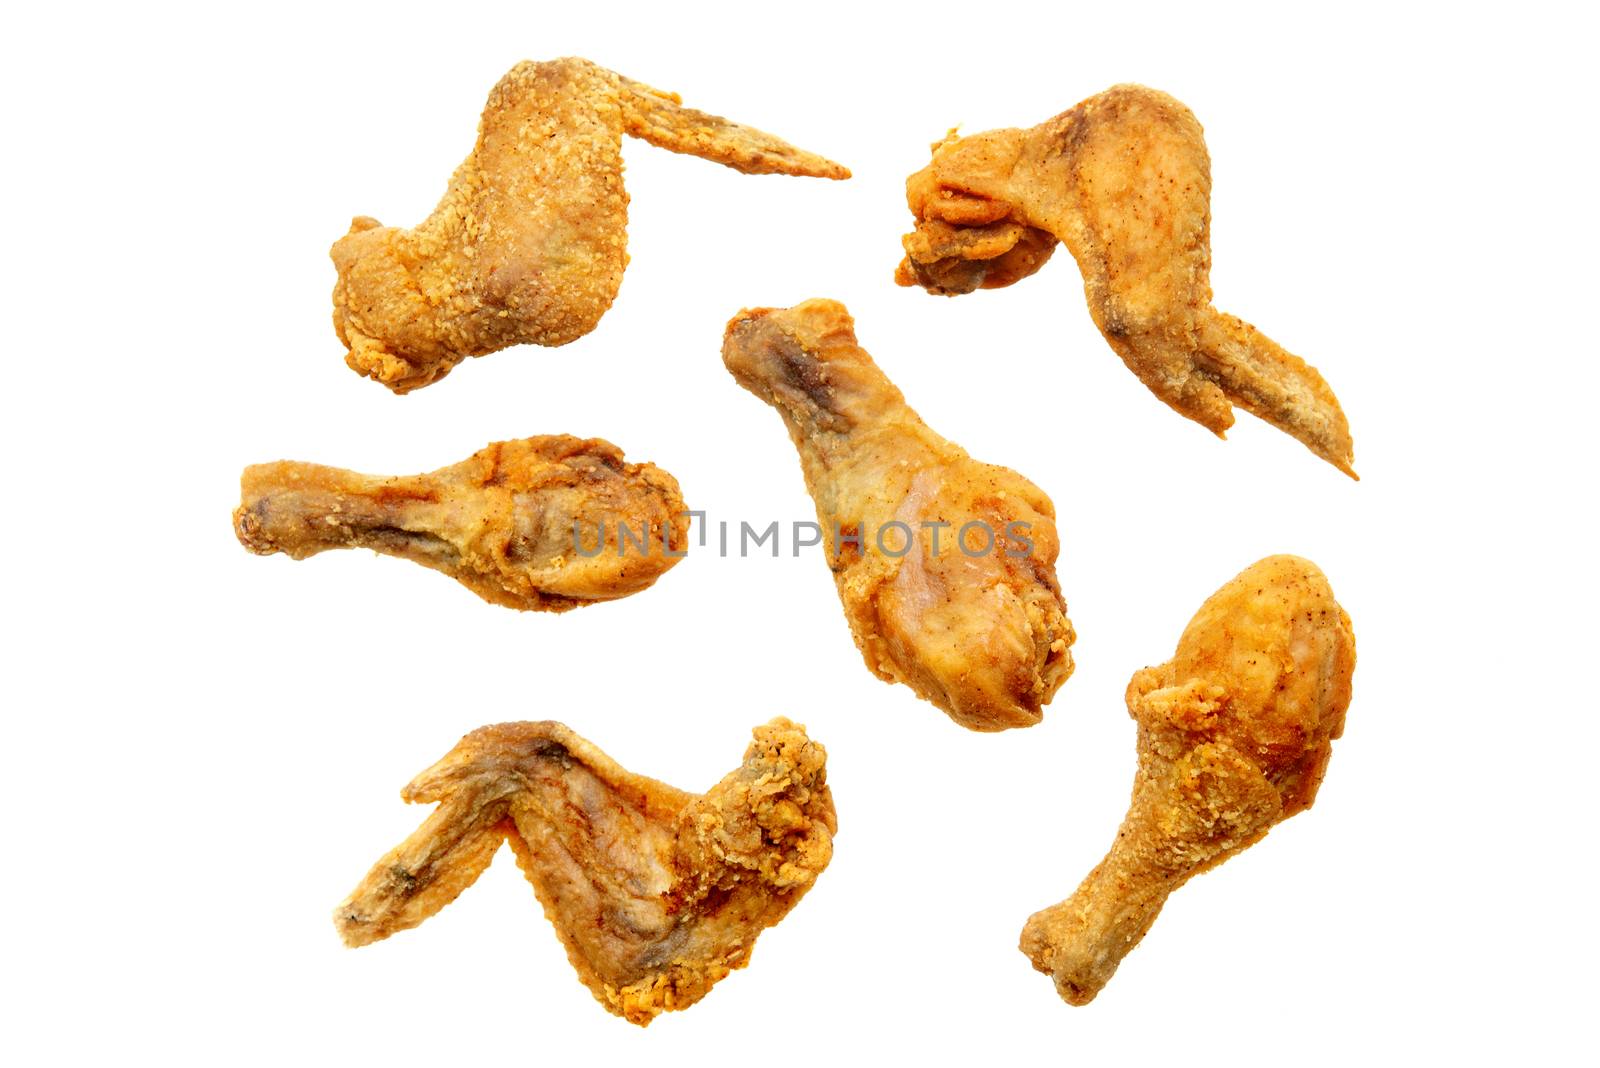 Original recipe fried chickens isolated. by szefei